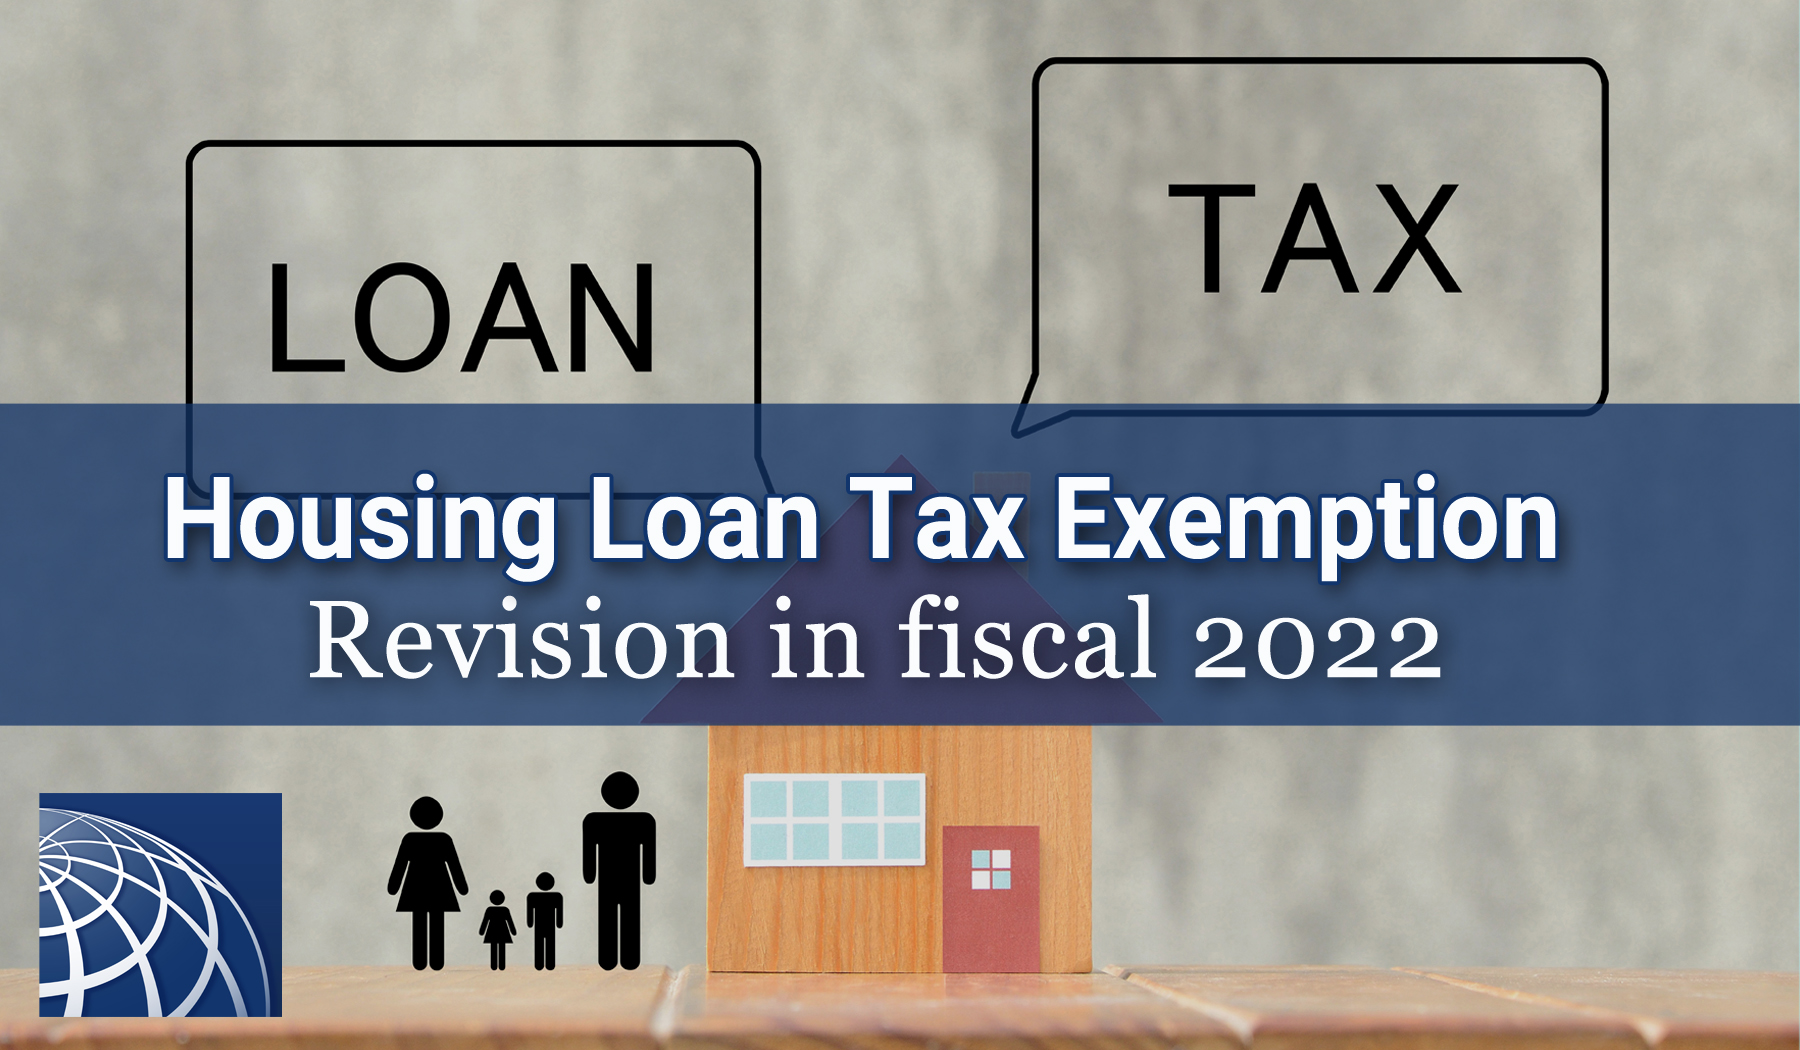 housing-loan-tax-exemption-revision-in-fiscal-2022-plaza-homes